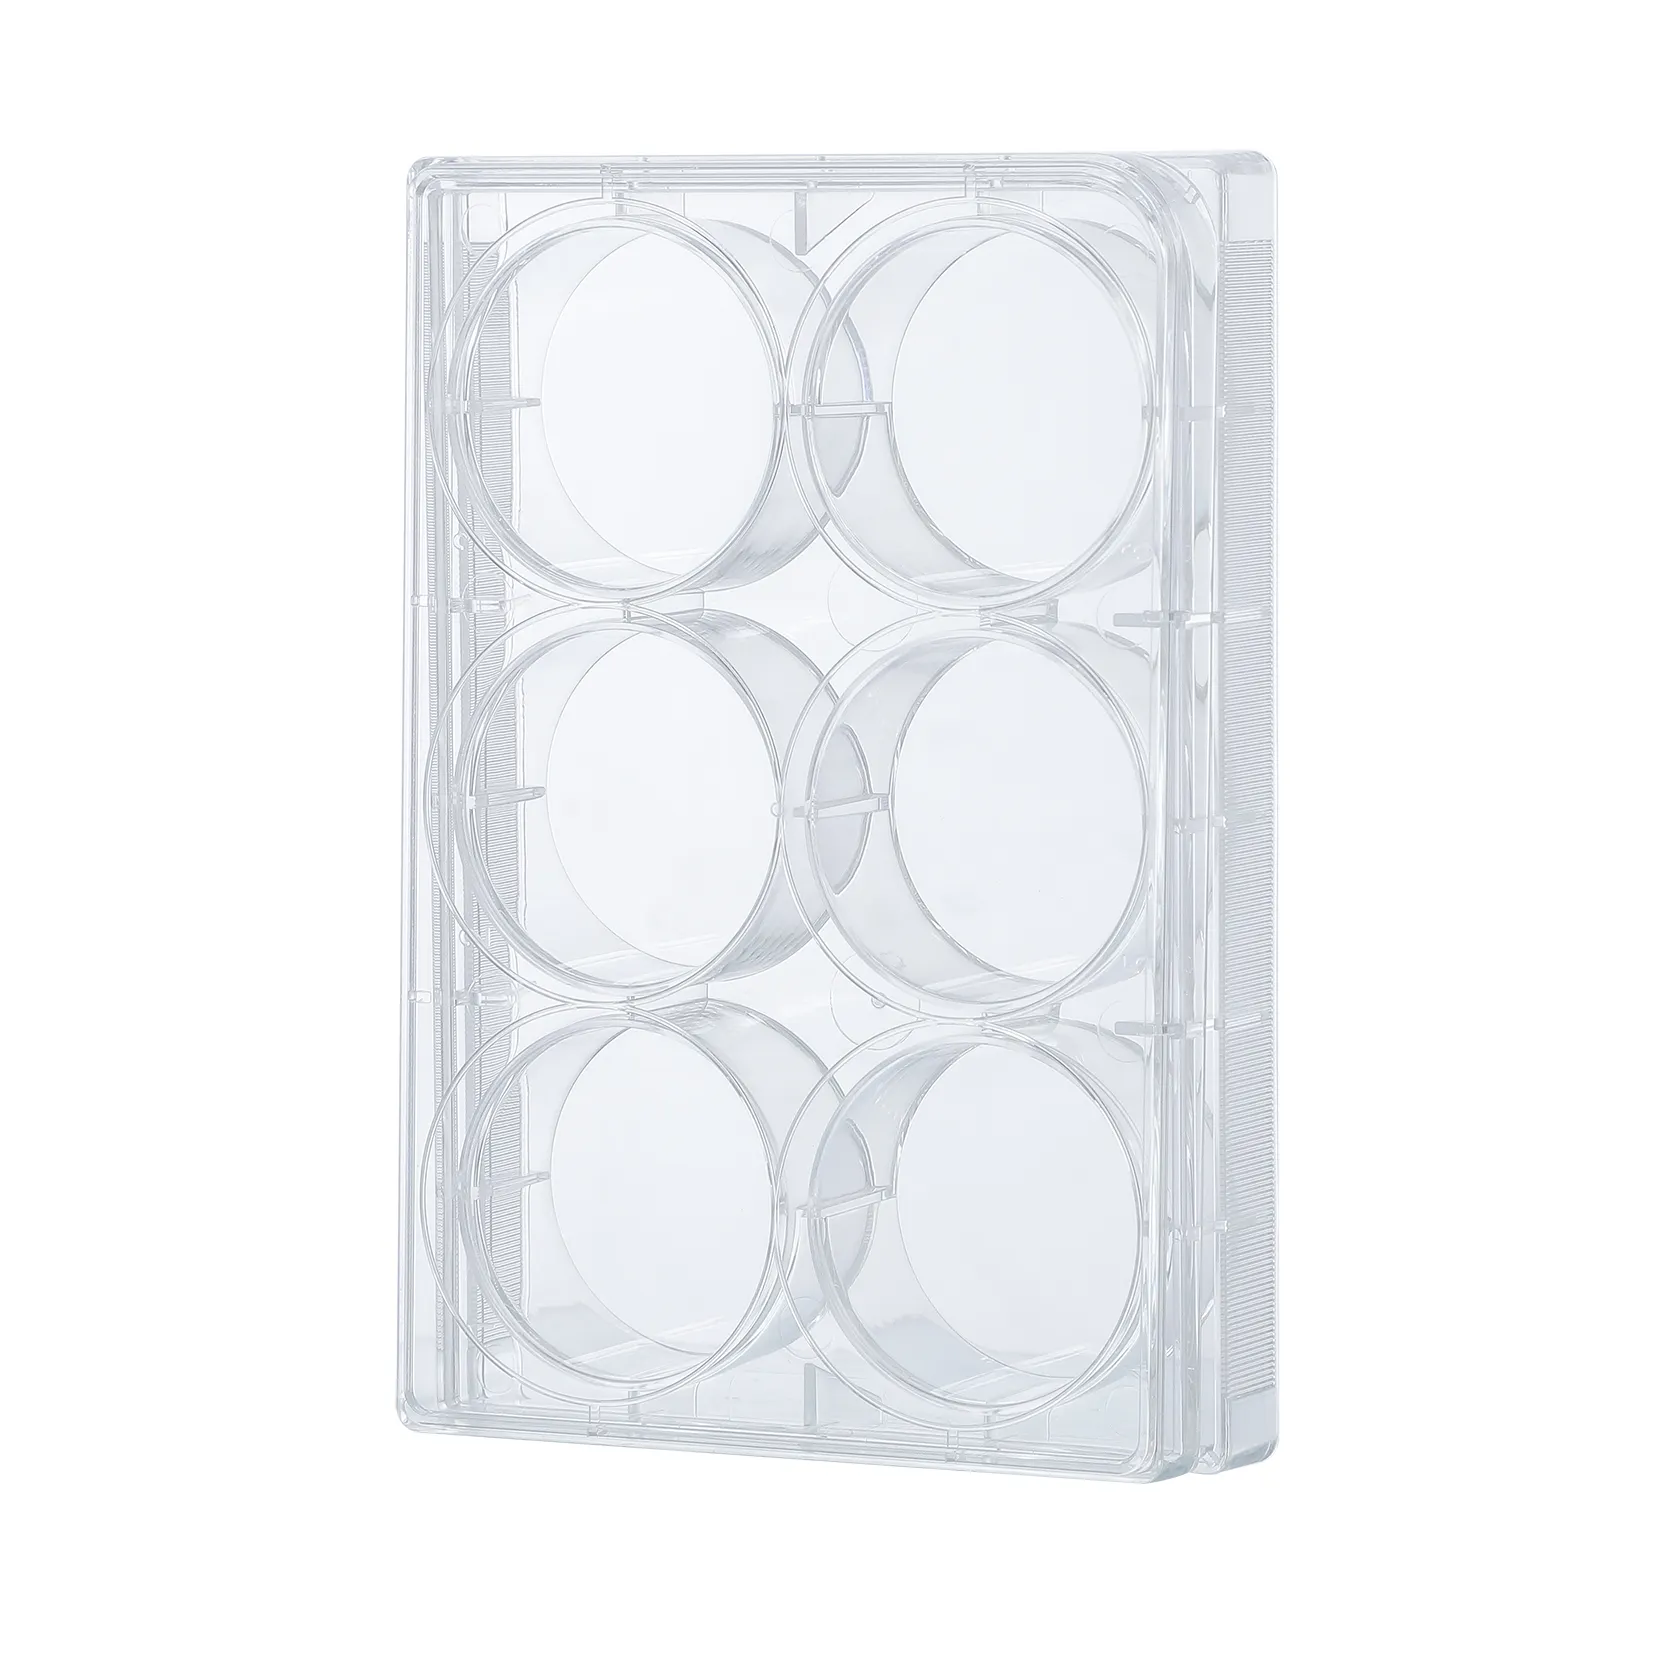 Non-Pyrogenic DNase/RNase-FREE Clear 100% virgin polystyrene 96 Well Cell Culture Plate